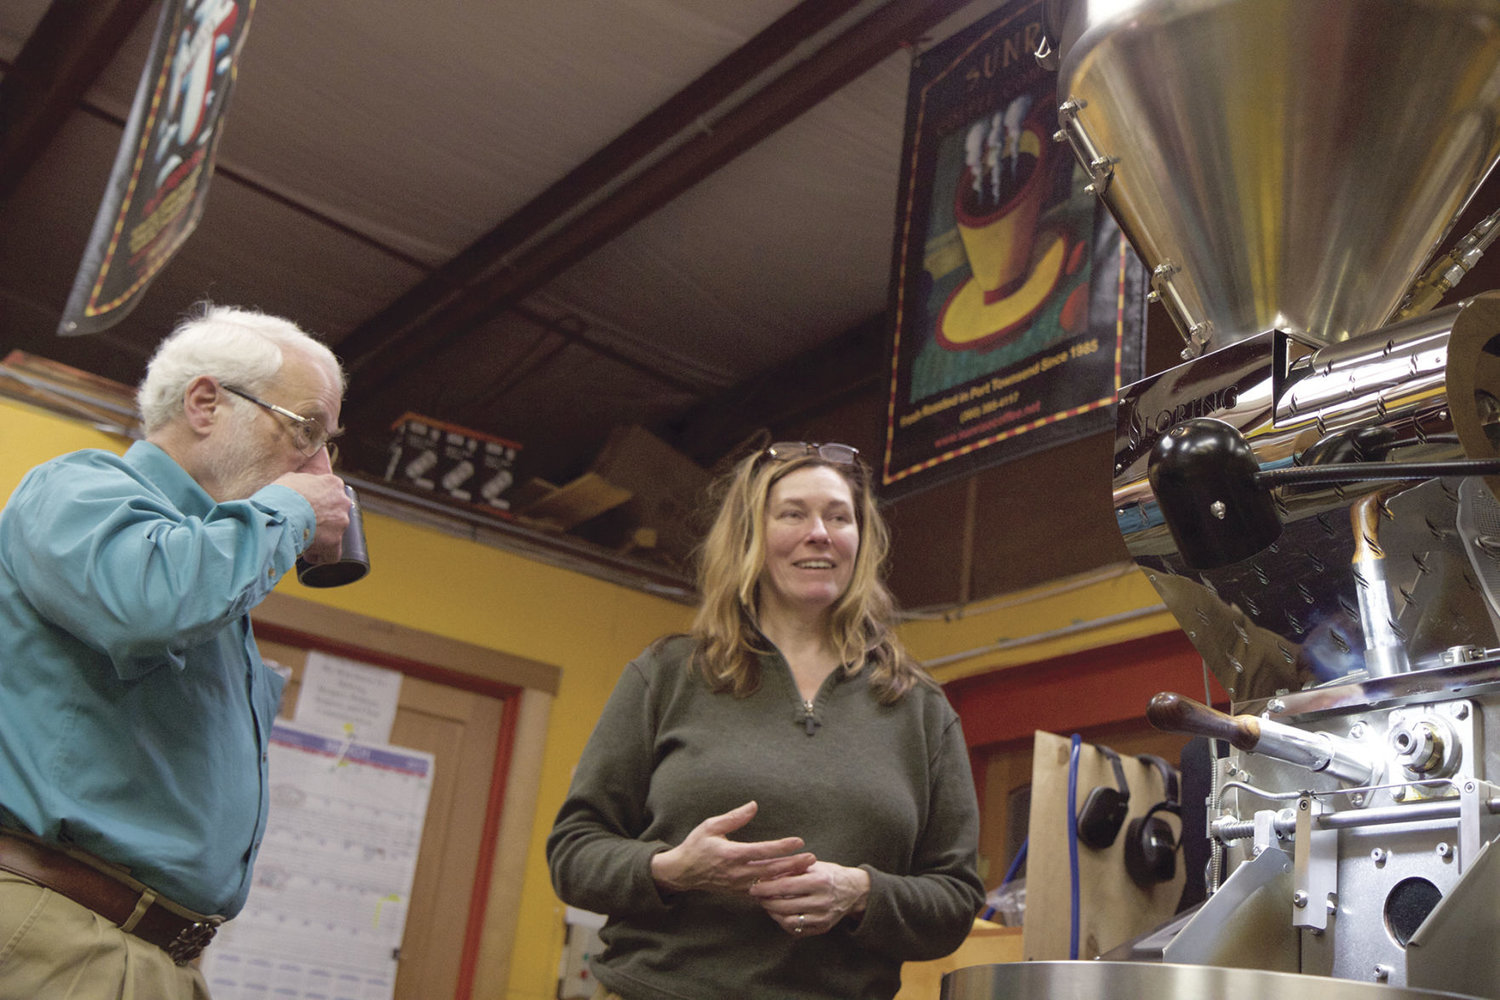 Earll Murman, left, listens as Sue Ohlson, co-owner of Sunrise Coffee in Port Townsend, explains the workings of a $100,000 coffee roaster, which Murman and other local investors helped her to purchase. The roaster also is helping to expand her business. Ohlson is scheduled to be one of the loan recipients to speak about LION (Local Investing Opportunities Network) on Saturday. Murman is a member of LION. Photo by Allison Arthur